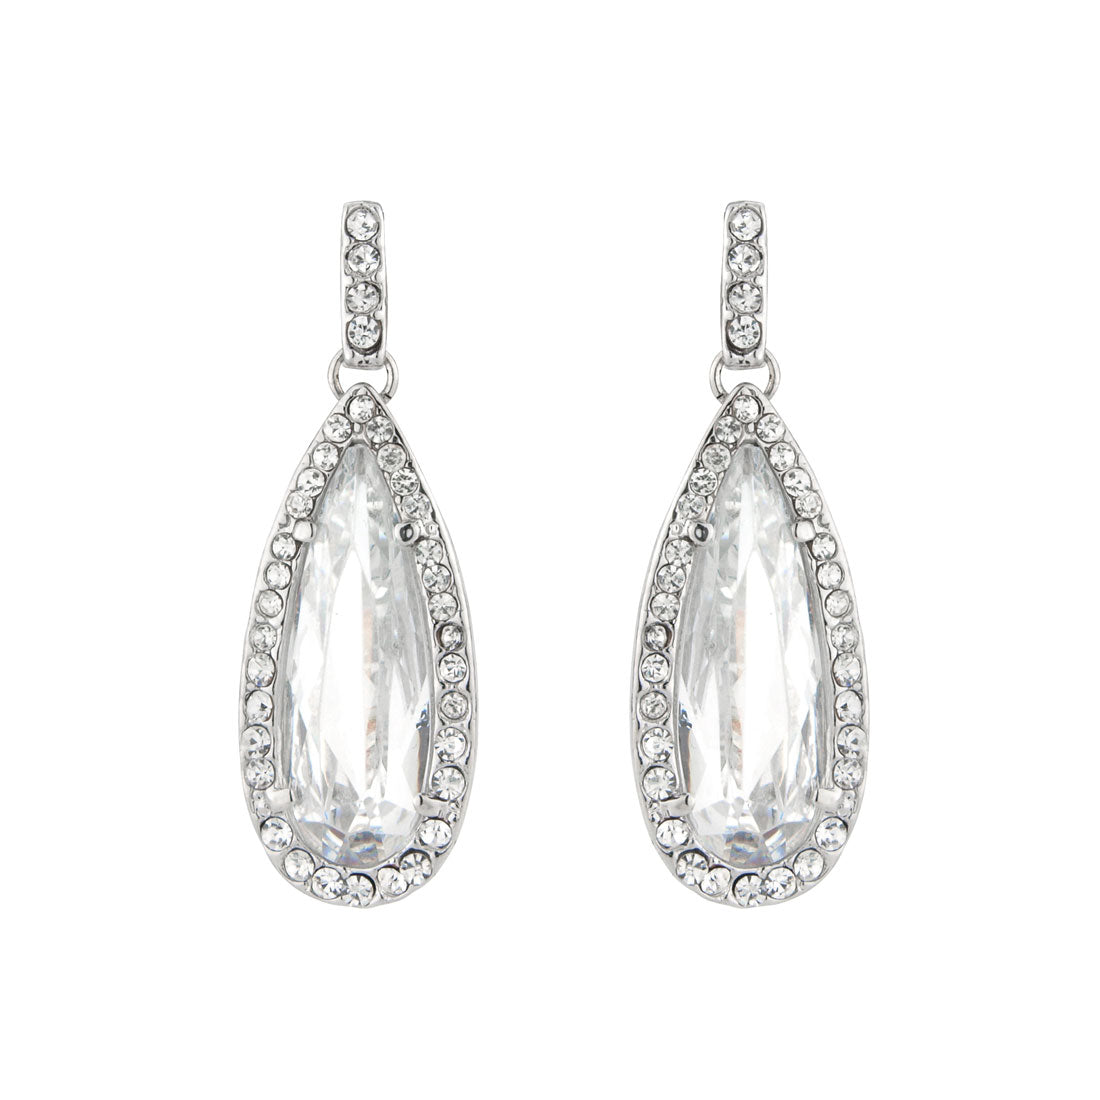 Exquisite Extravagance Crystal Drop Earrings - Glitzy Secrets